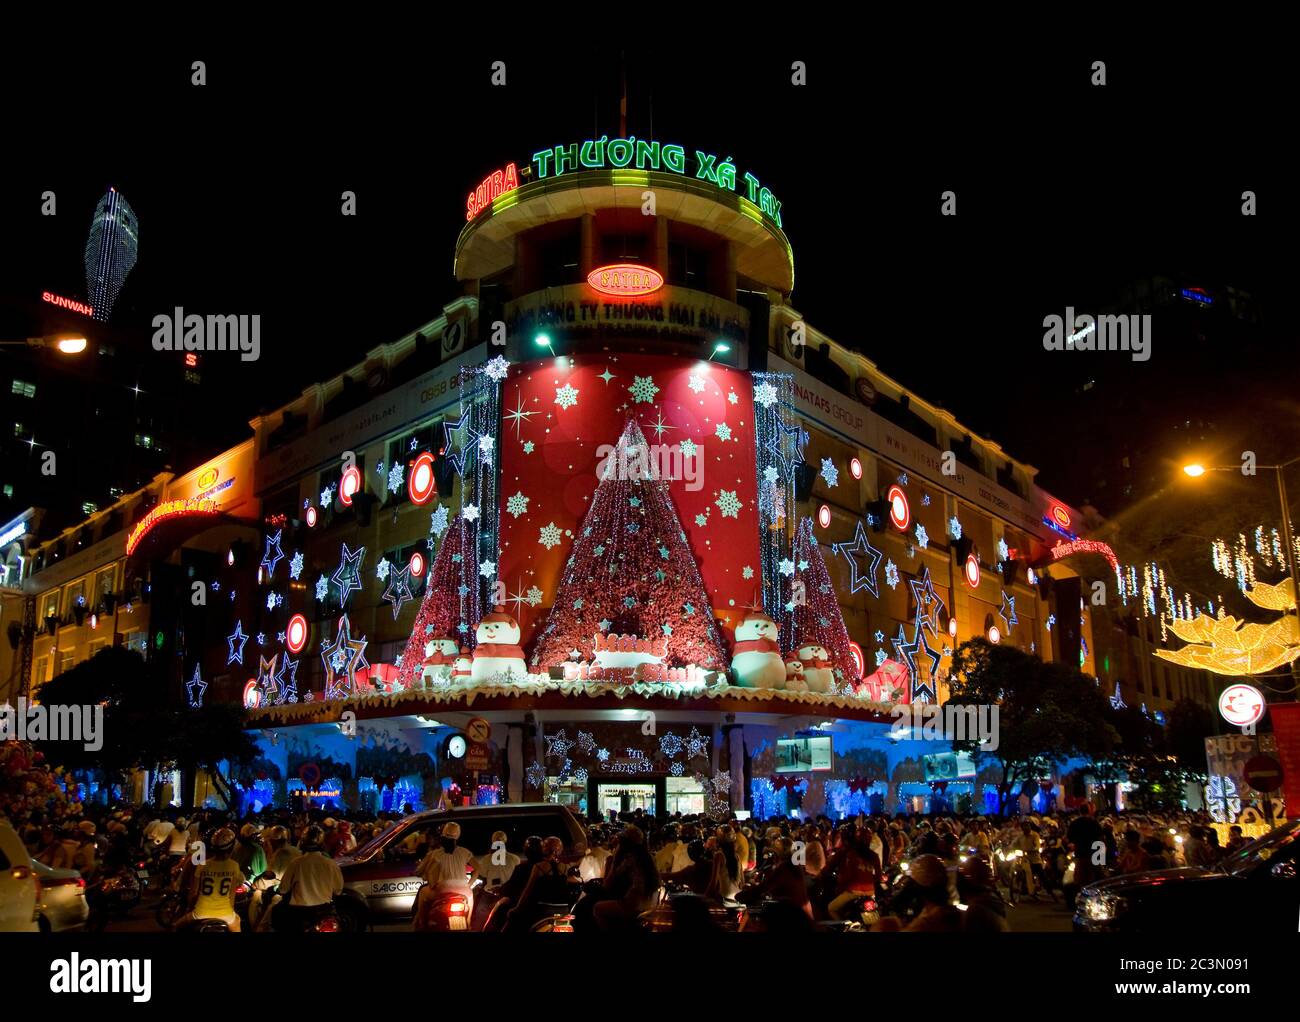 Thuong Xa Tax, the classic Saigon department store with Christmas decorations and shoppers in the street on December 22, 2010 in Ho Chi Minh City. Stock Photo